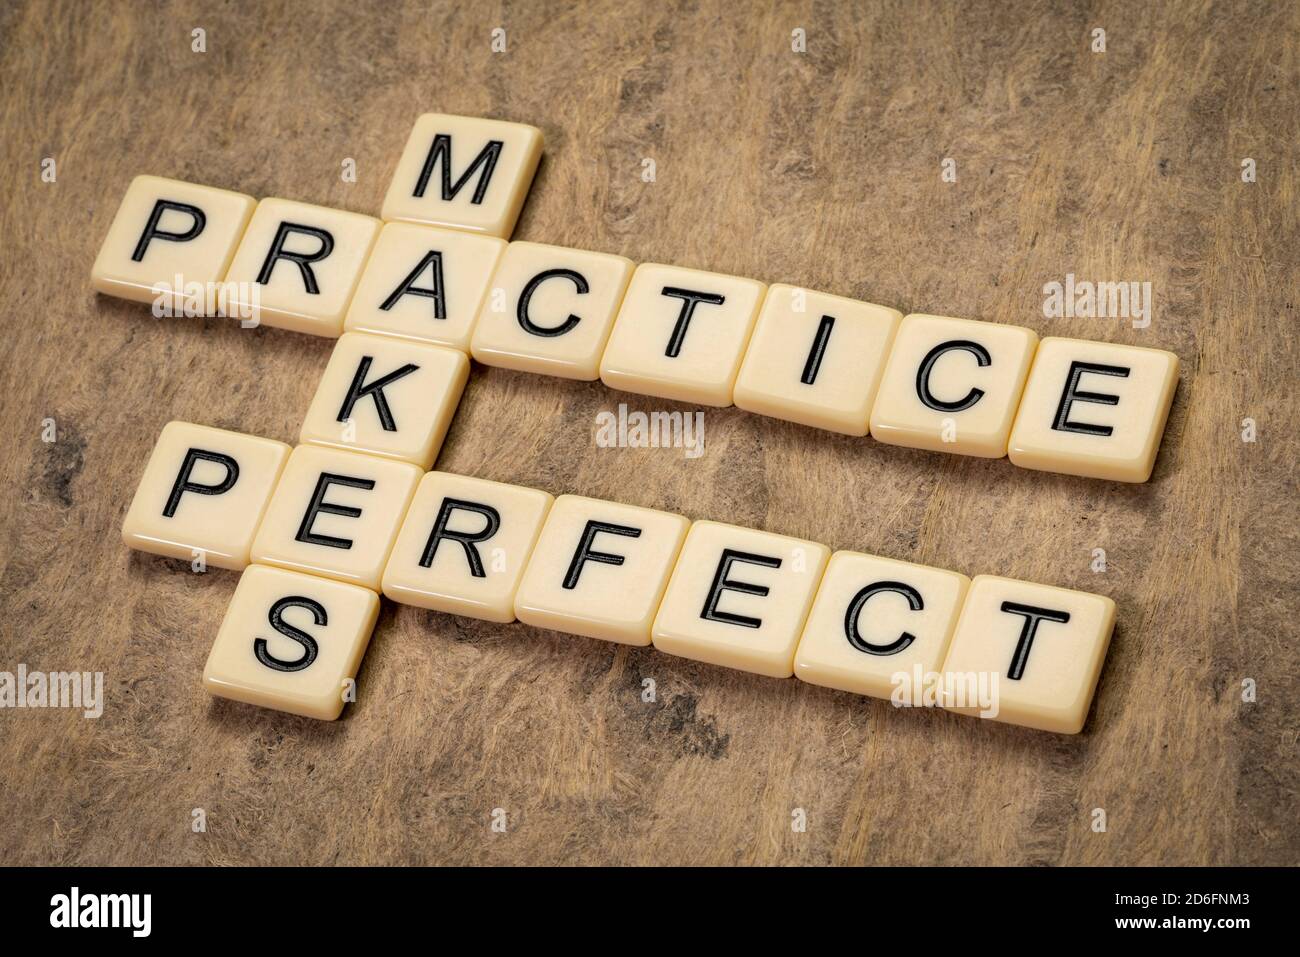 Practice Makes Perfect High Resolution Stock Photography and Images - Alamy